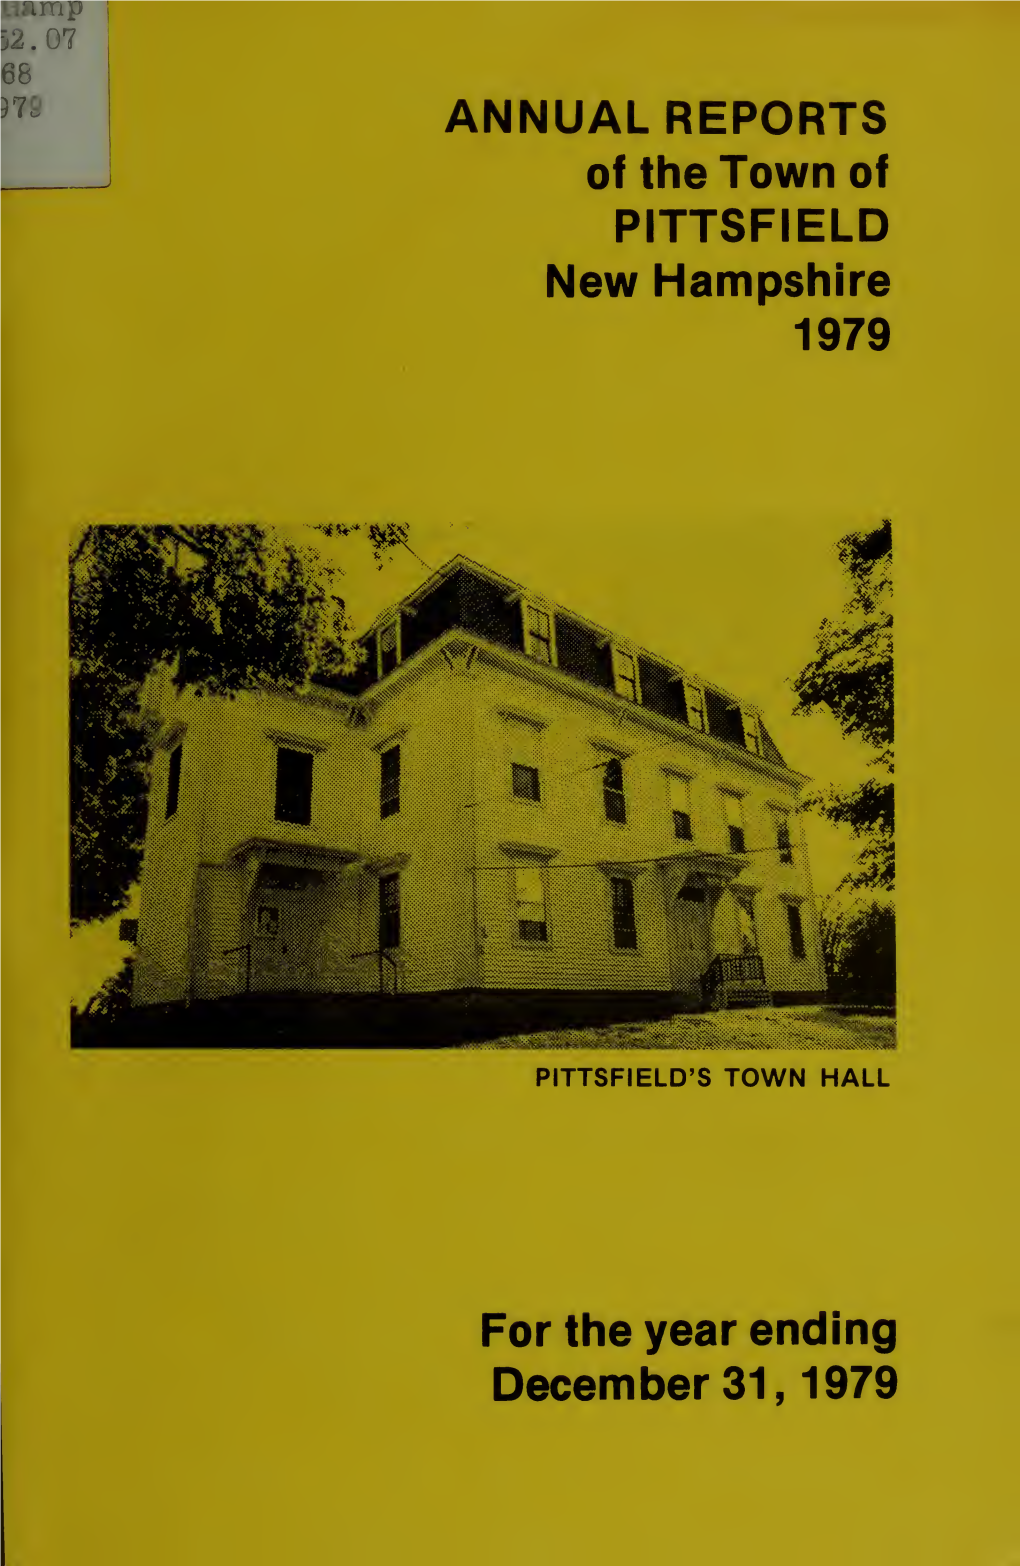 Annual Report of the Town of Pittsfield, New Hampshire